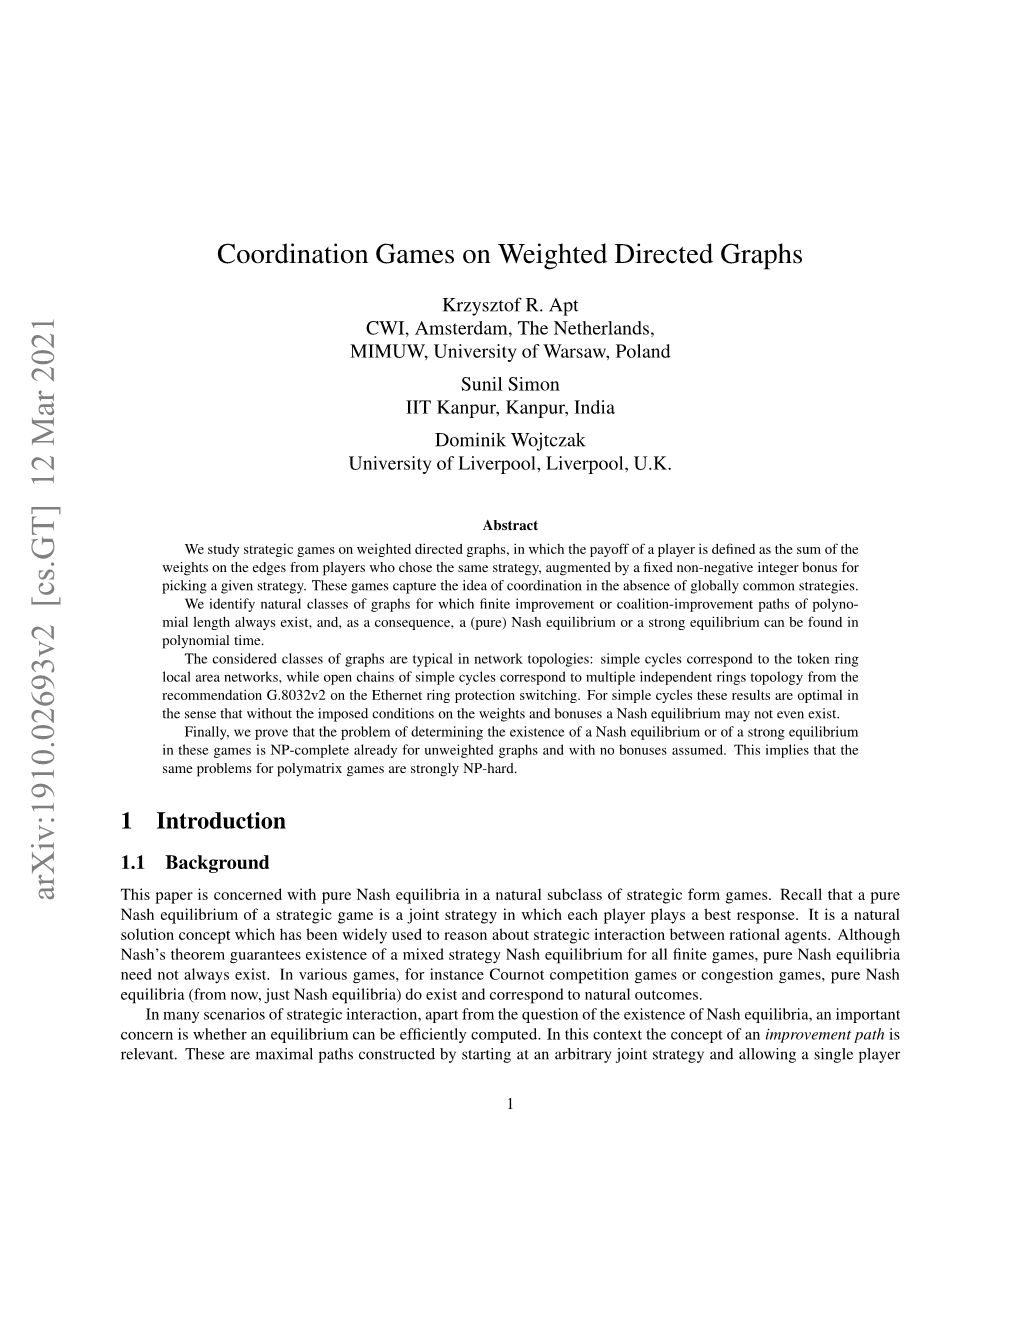 Coordination Games on Weighted Directed Graphs, from Now on Just Coordination Games